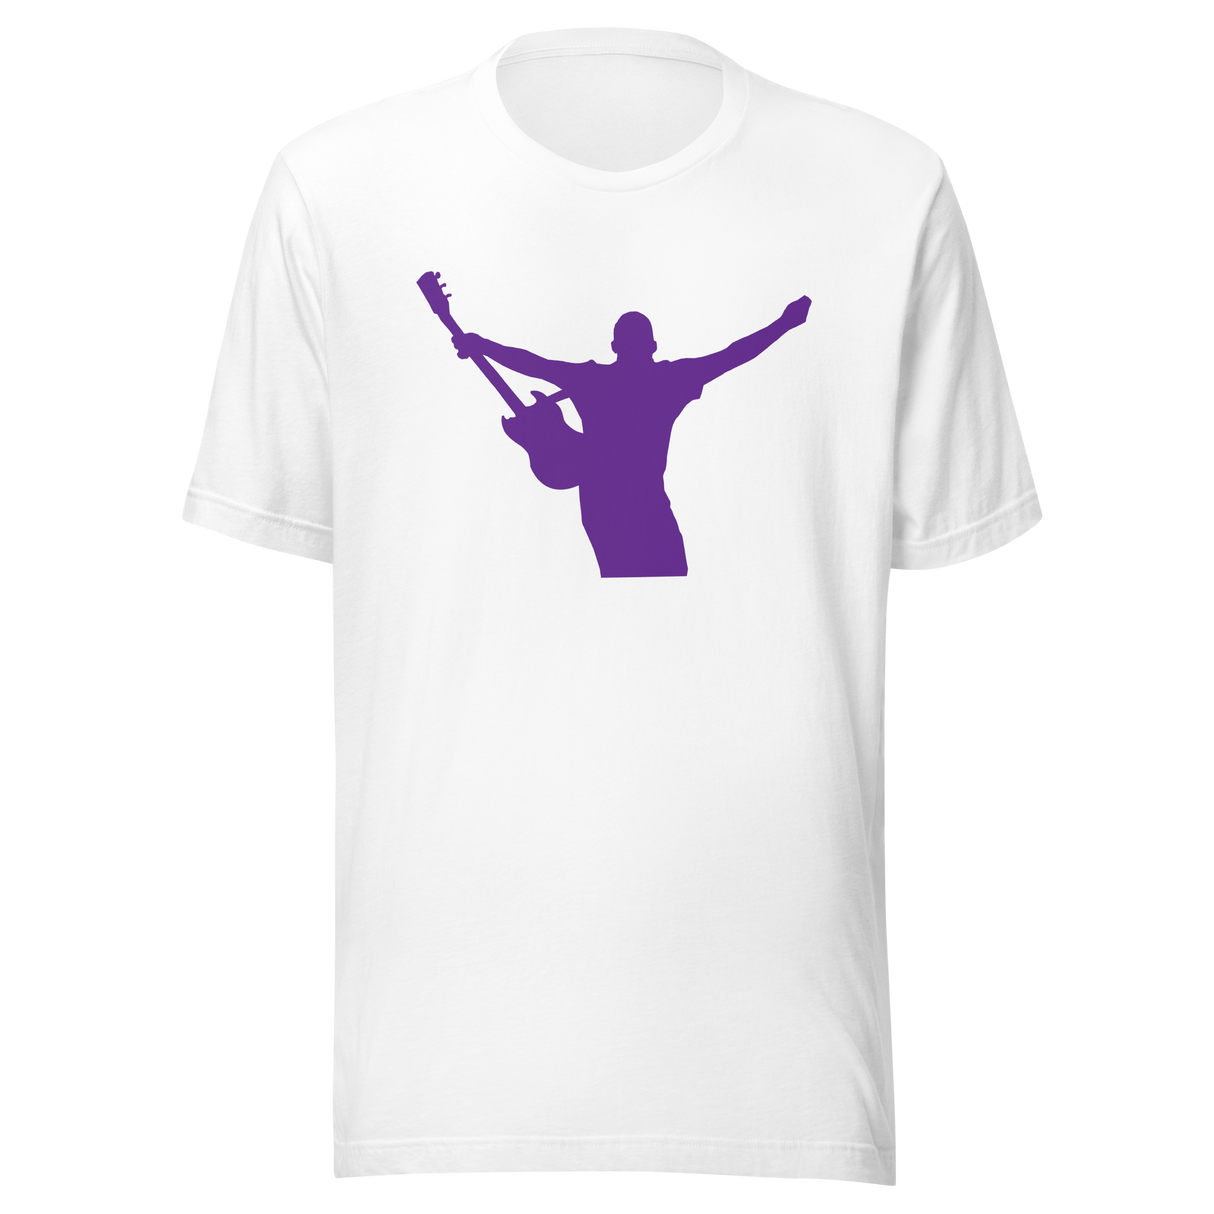 rockstar-with-one-arm-up-holding-a-guitar-music-tee-rockstar-t-shirt-guitar-tee-silhouette-t-shirt-purple-tee#color_white